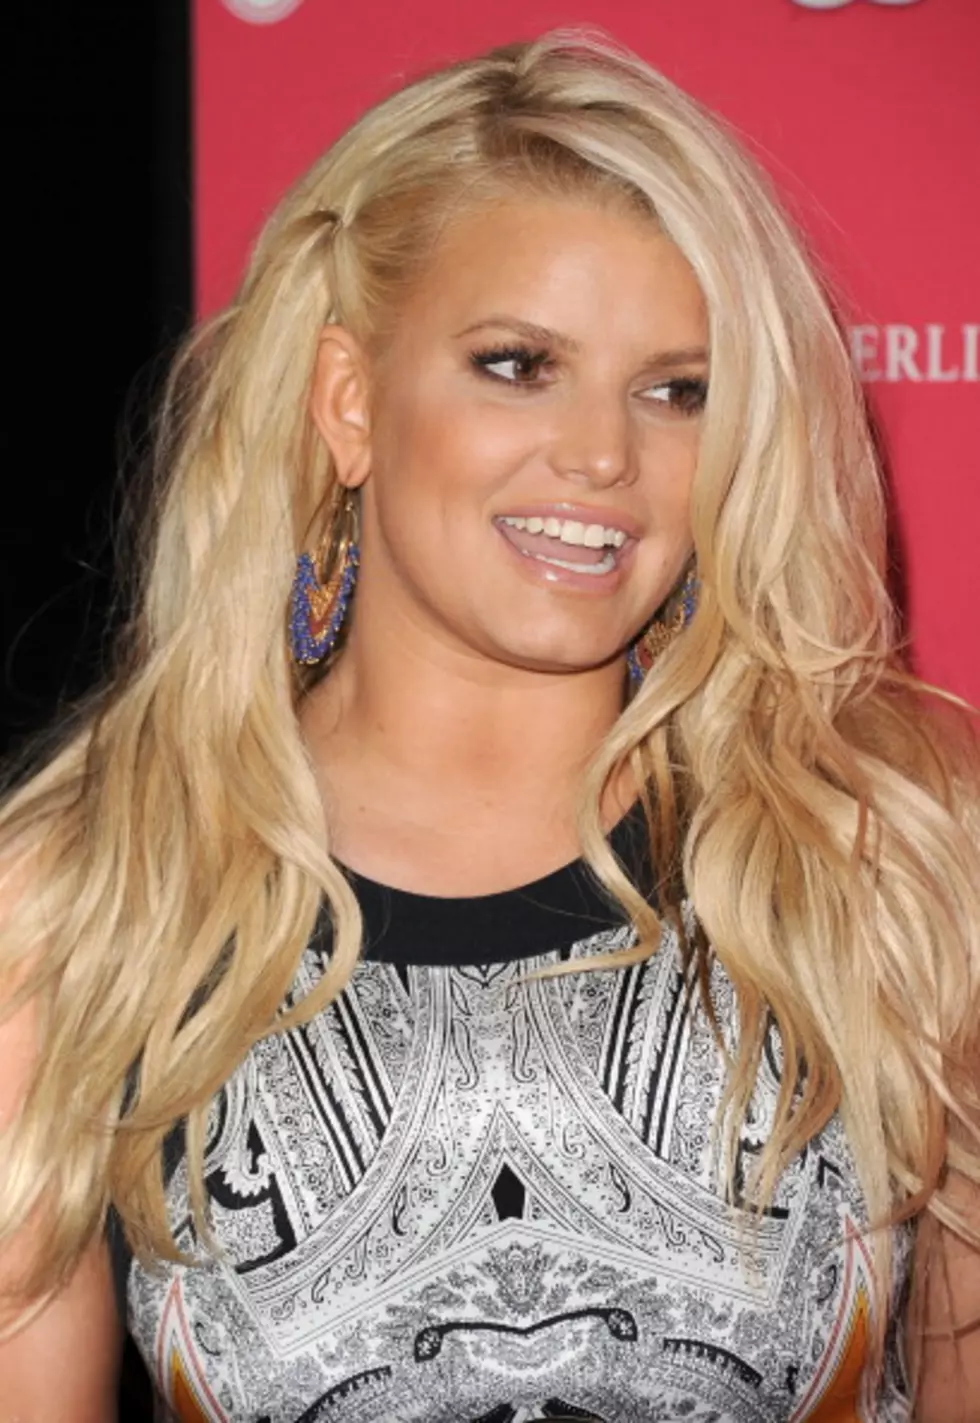 Just How Dirty Is Jessica Simpson’s Mouth?